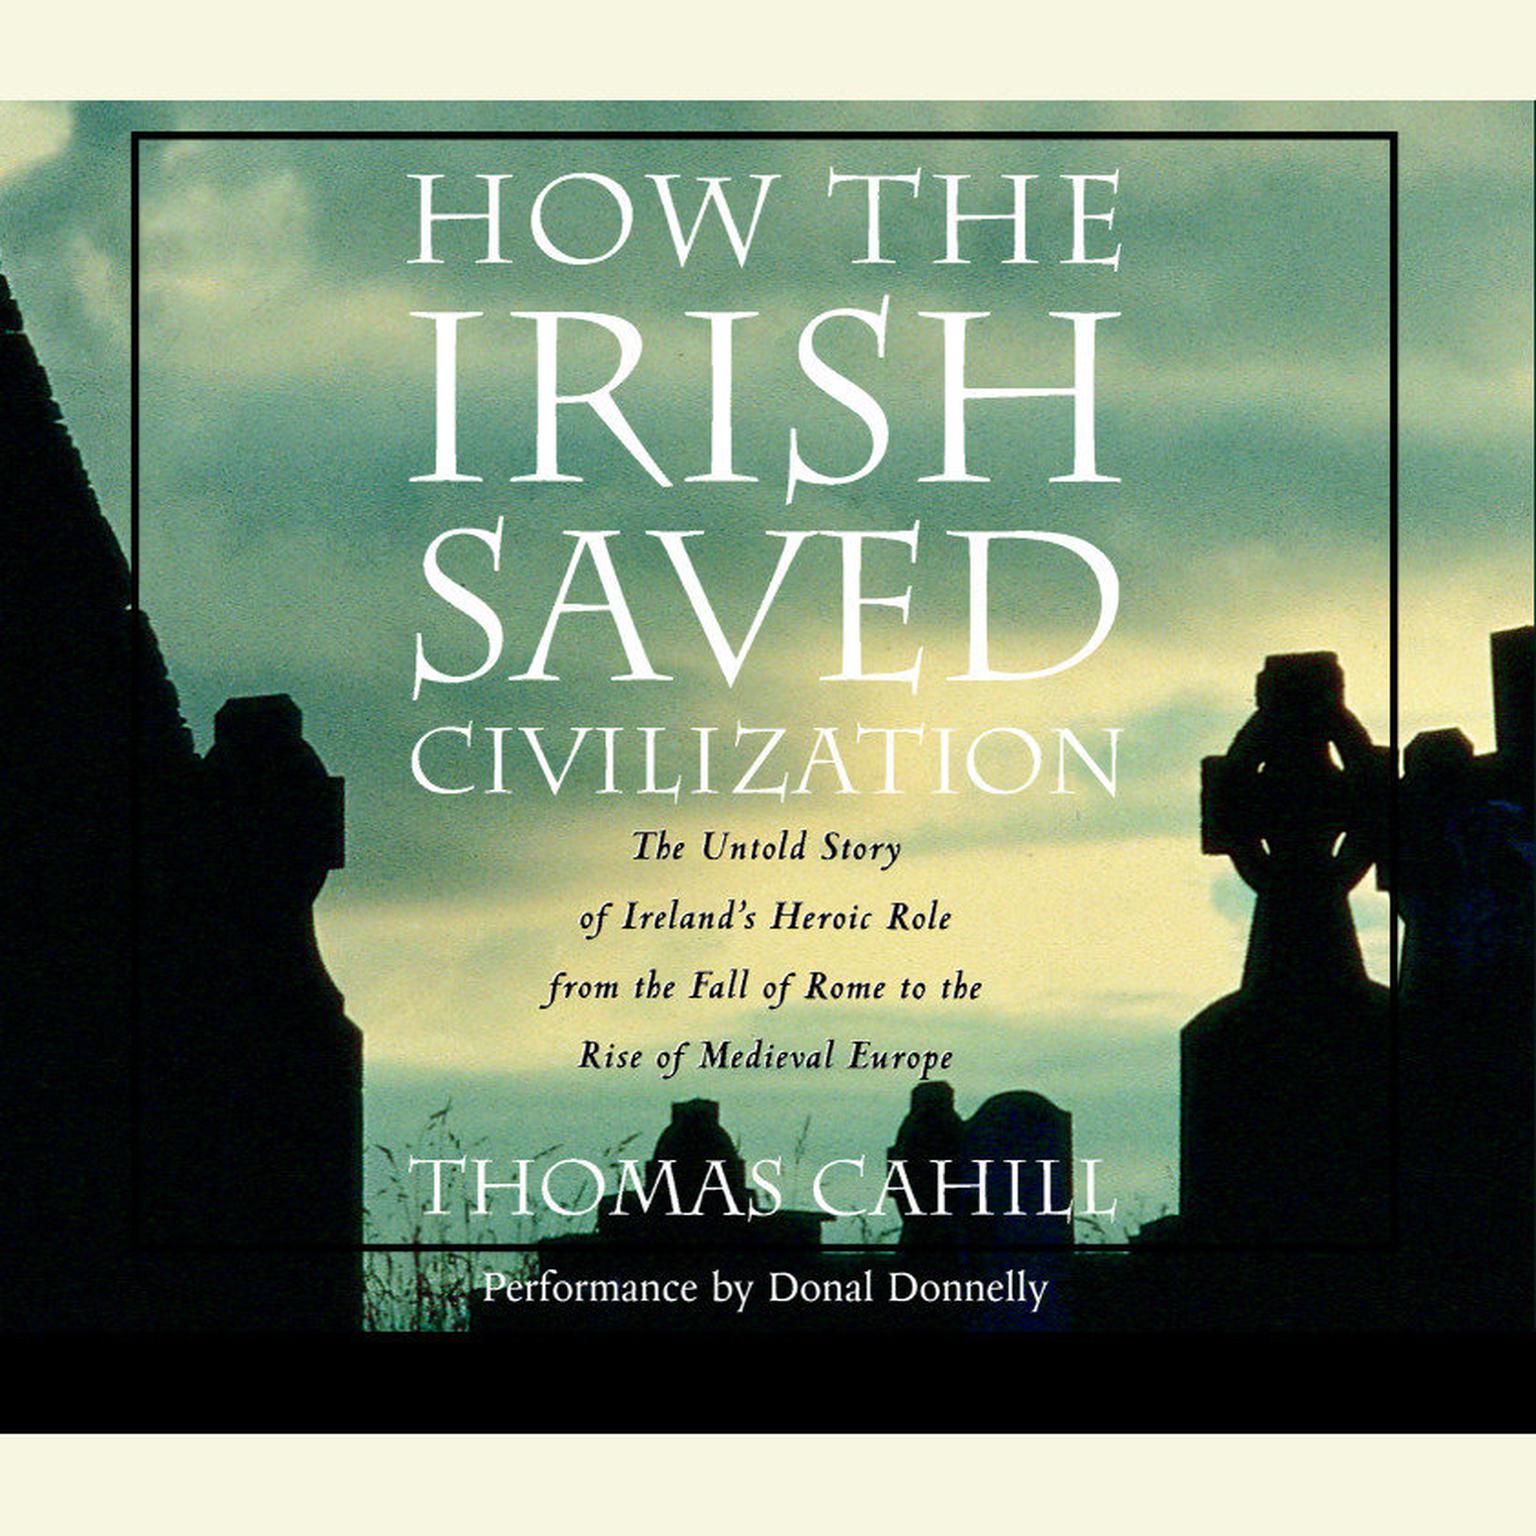 How the Irish Saved Civilization (Abridged): The Untold Story of Irelands Heroic Role from the Fall of Rome to the Rise of Medieval Europe Audiobook, by Thomas Cahill